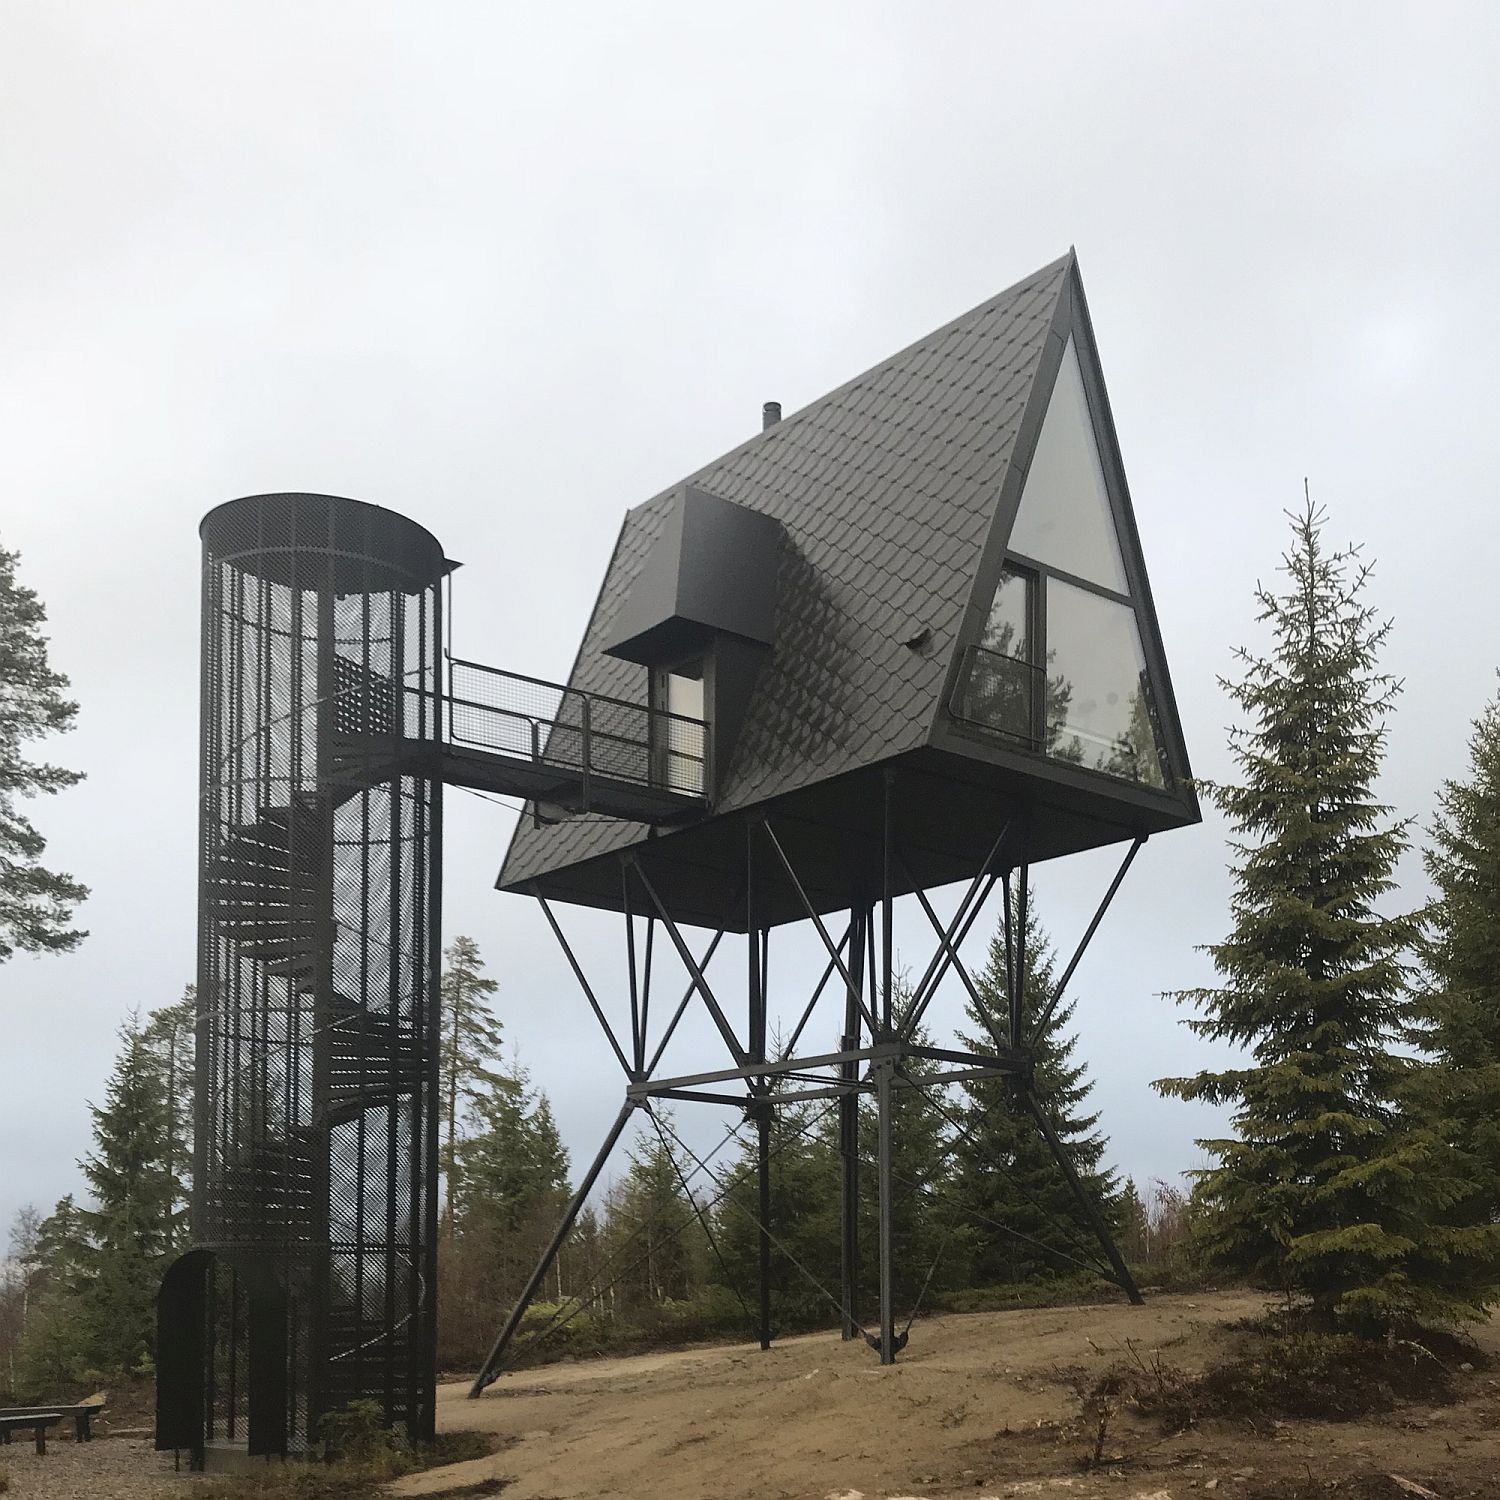 Contemporary rental cabins in the woods